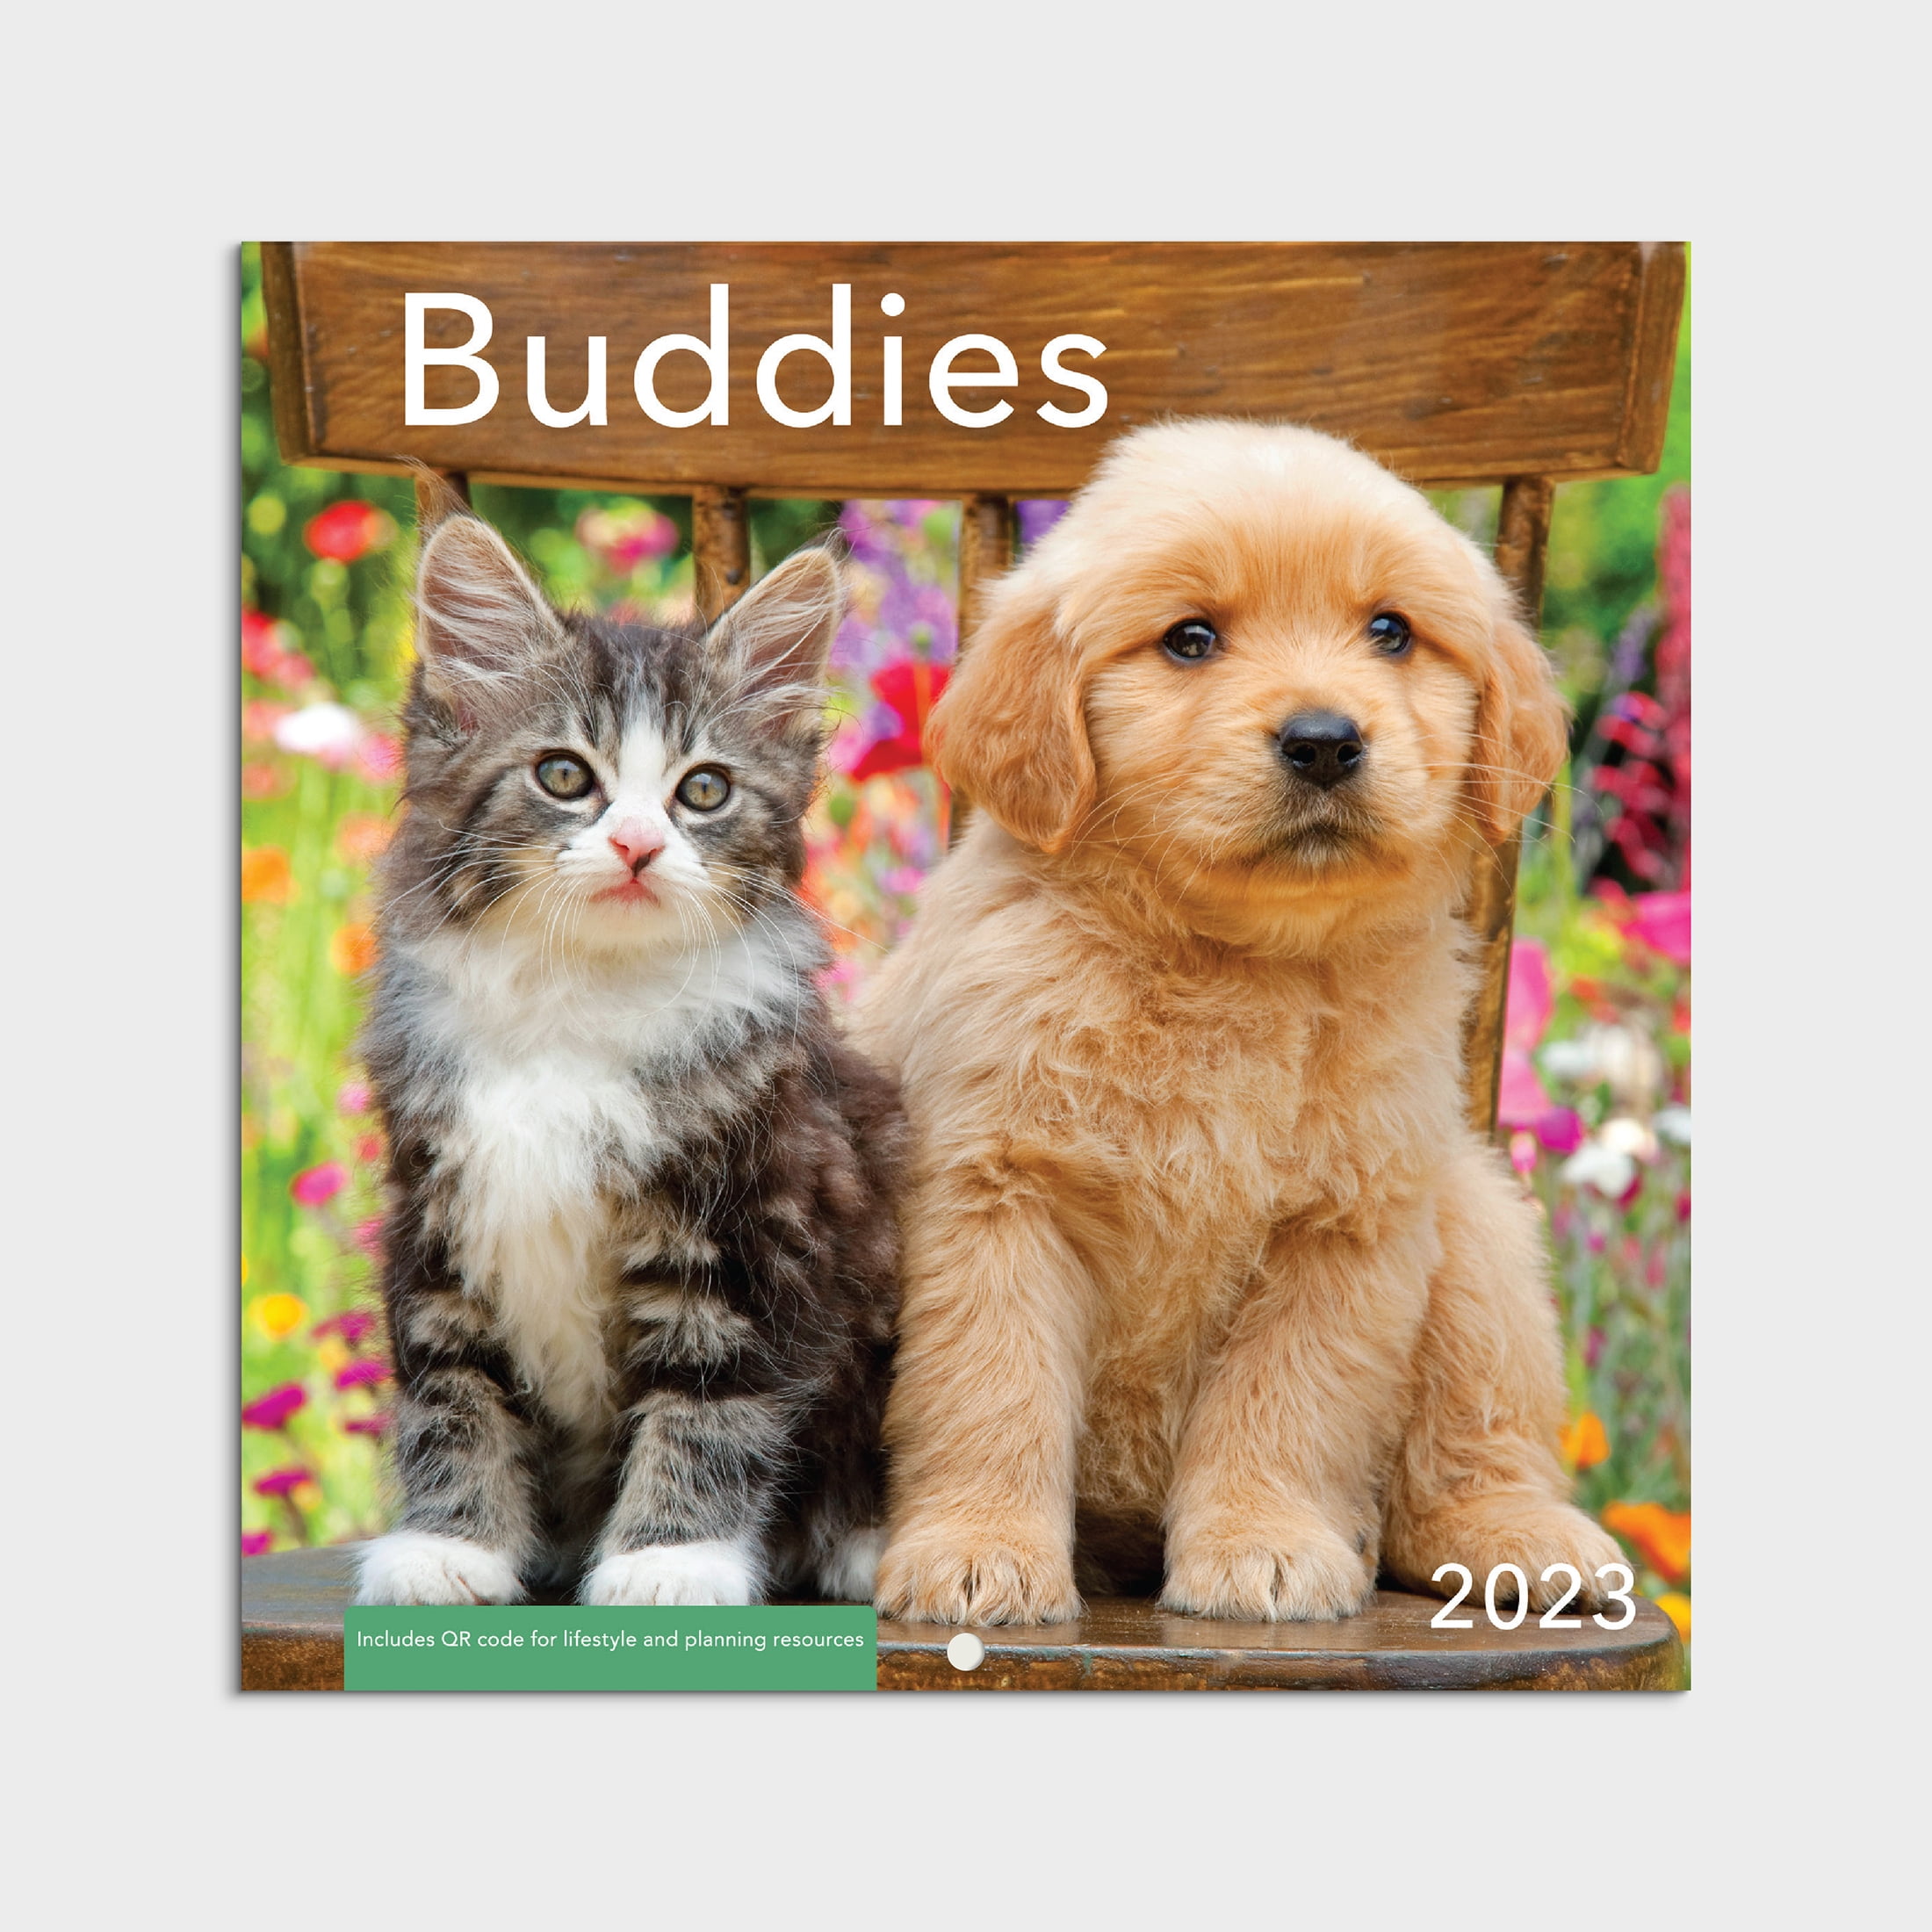 2023 Mini Wall Calendar - Buddies- 7"x7" Puppies and Kittens by Dayspring